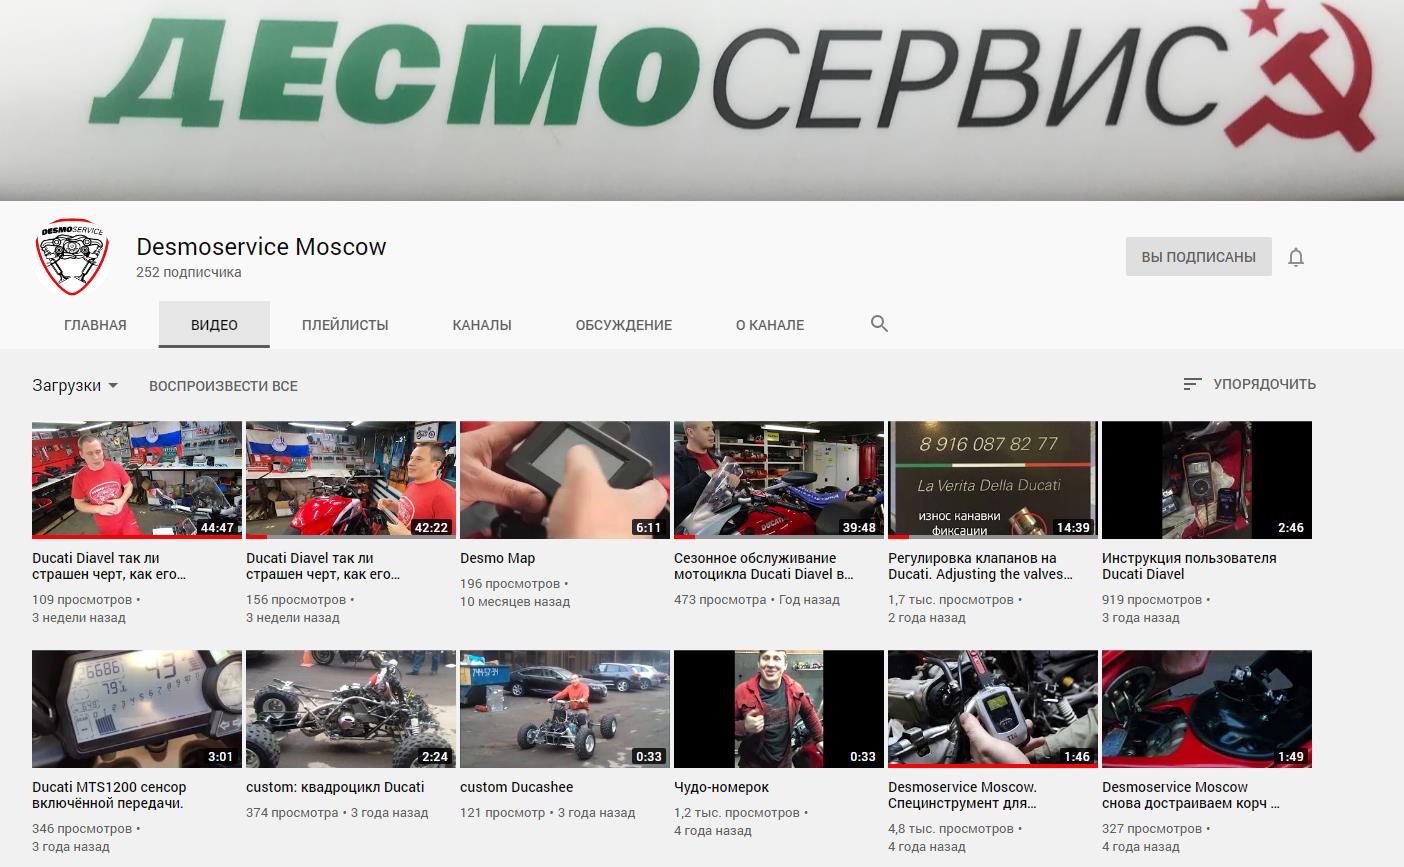 Desmoservice Moscow YuoTube